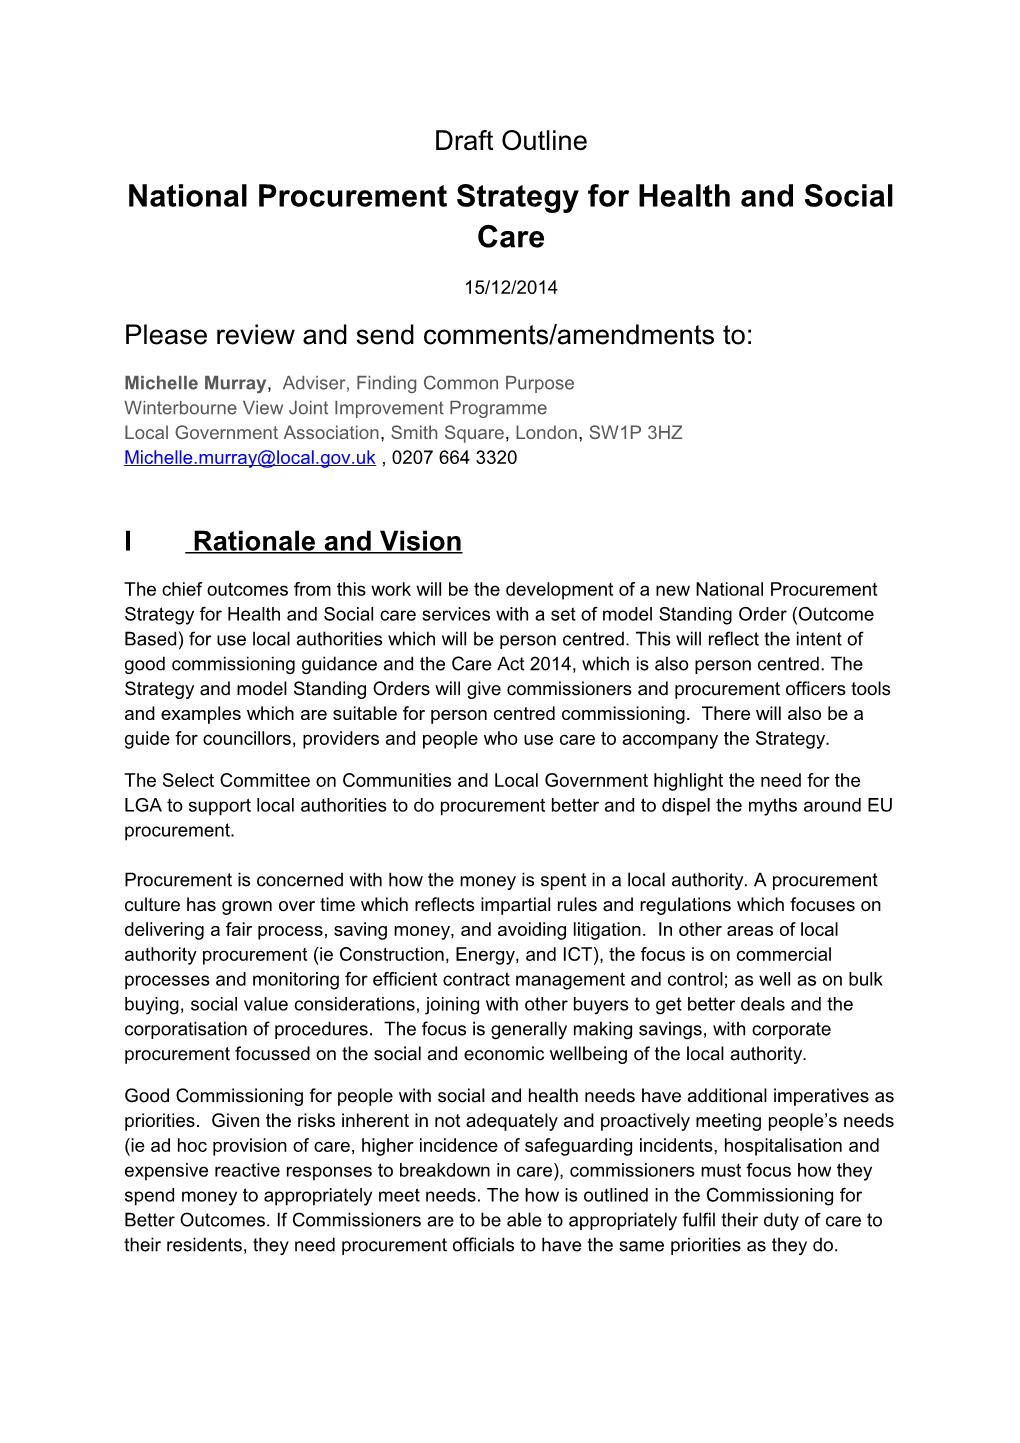 National Procurement Strategy for Health and Social Care